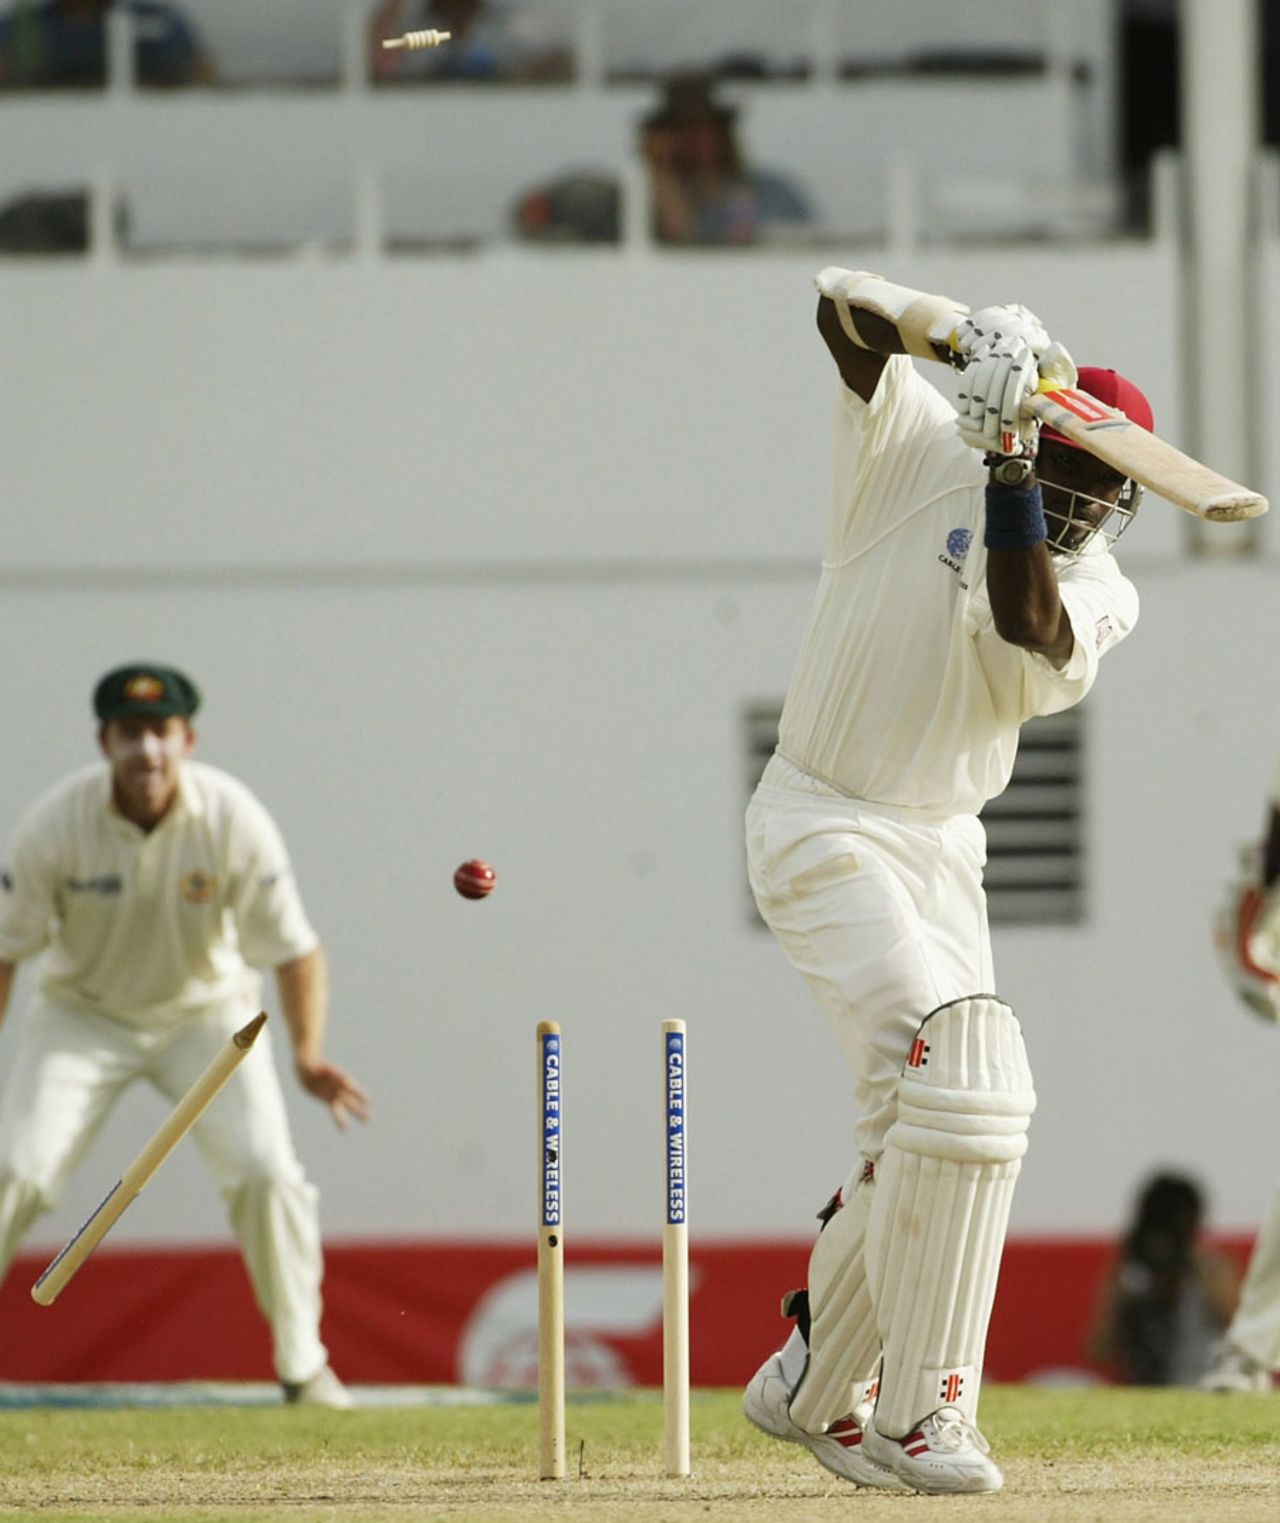 Chris Gayle is bowled by Glenn McGrath for a duck, West Indies v Australia, 4th Test, 1st day, St Johns, Antigua, May 9, 2003